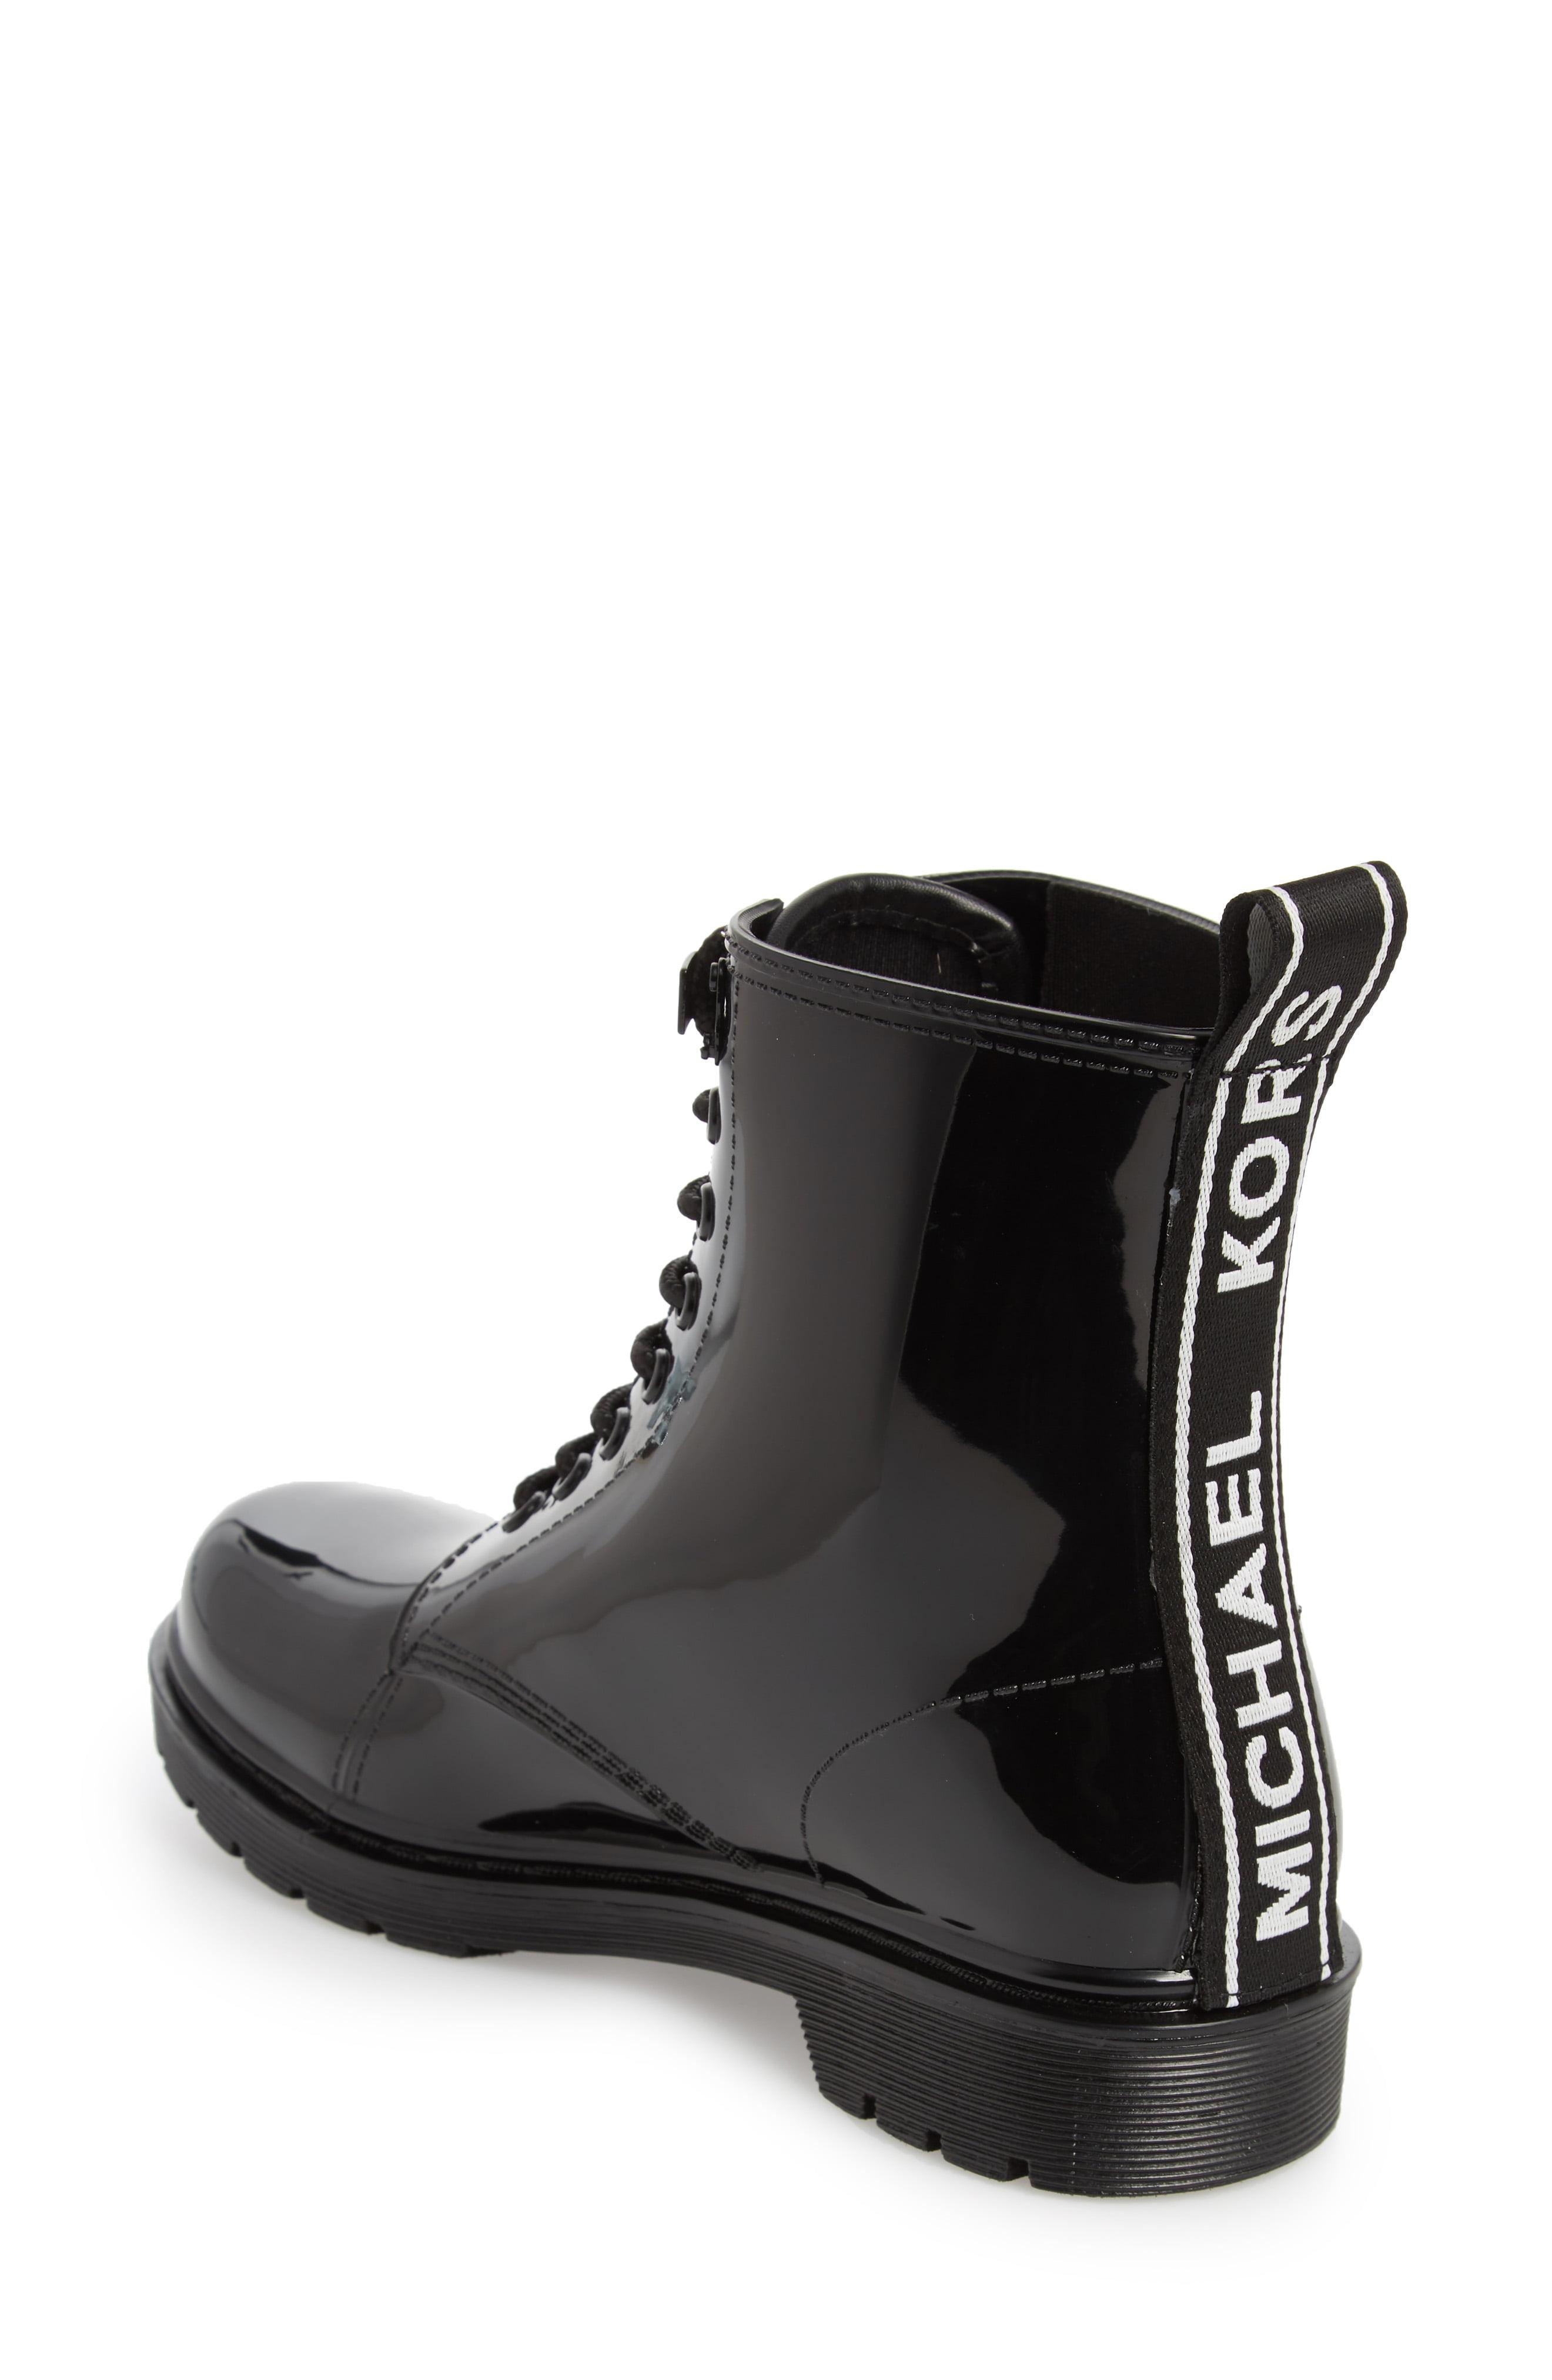 mk water boots